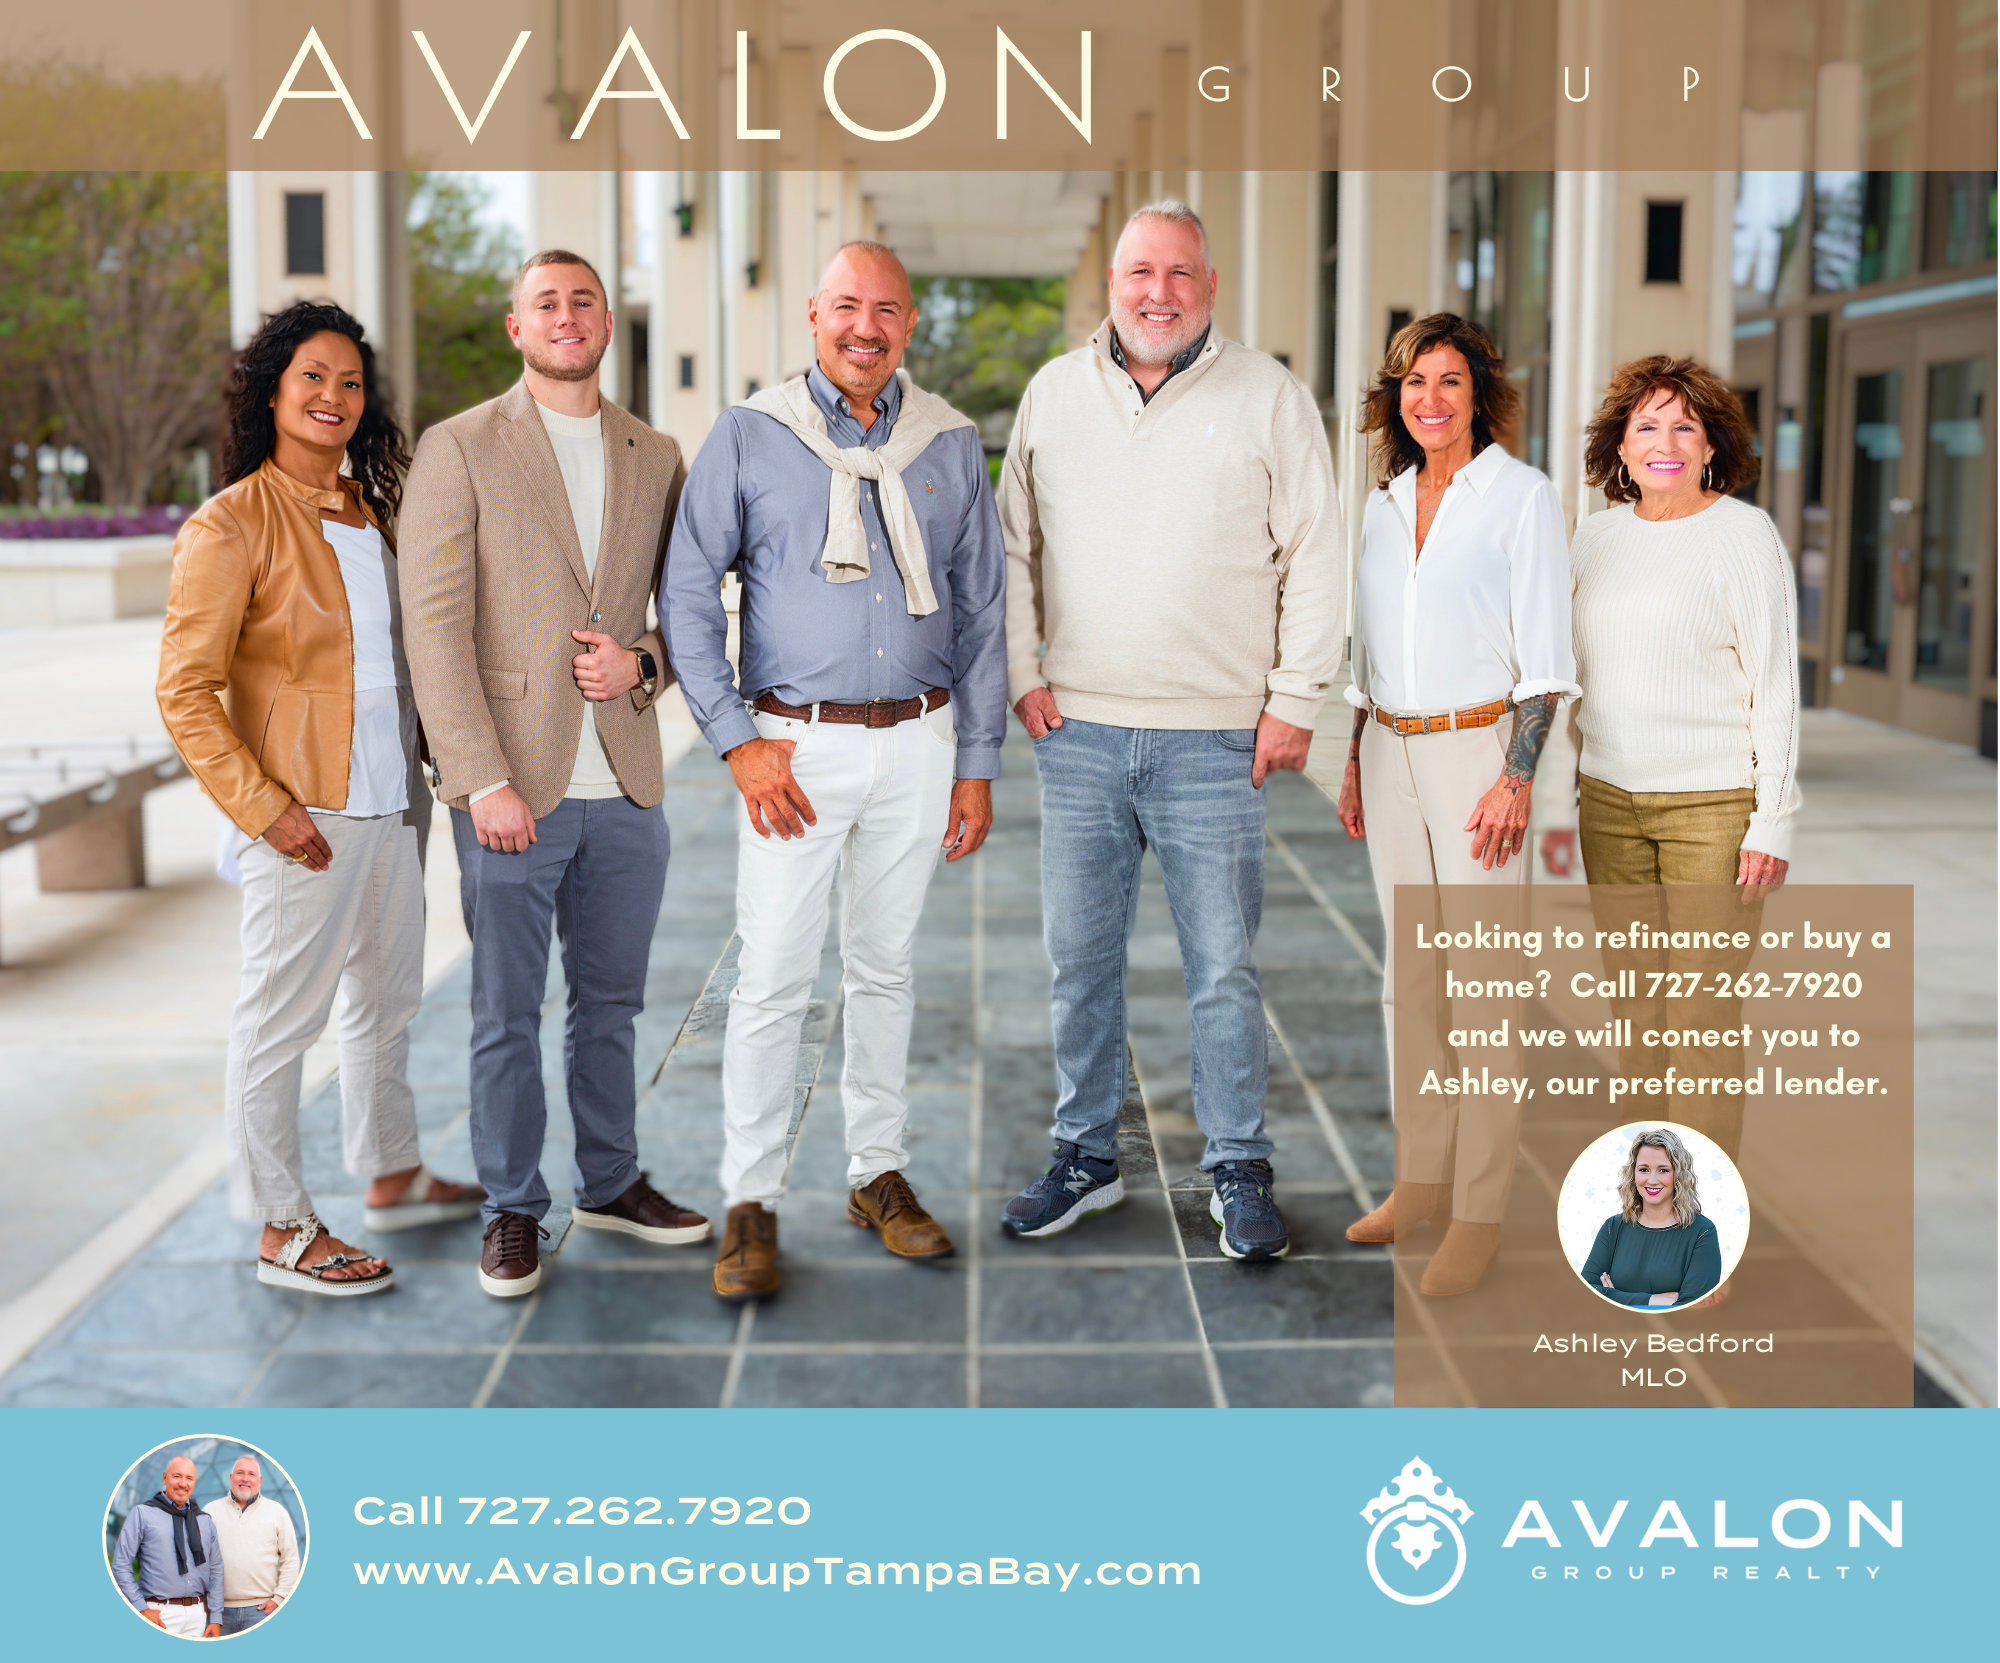 Best Realtor in St Petersburg picture shows the Avalon Group Realty team standing side by side. wearing gray color, creams and tans.